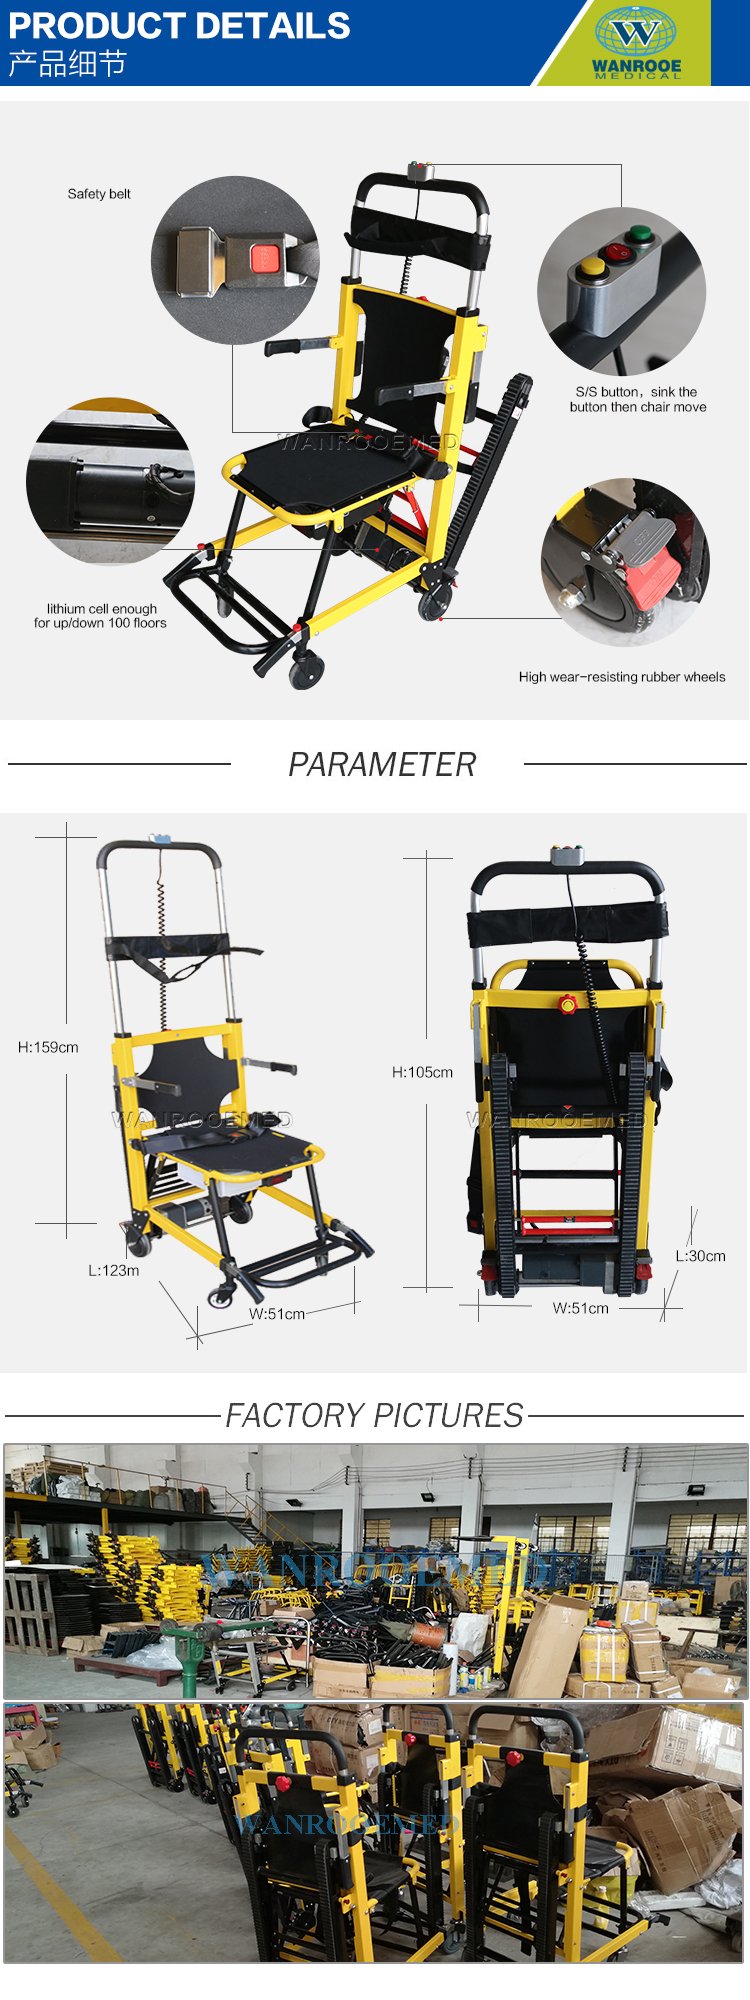 Emergency Stair Stretcher, Electric Stair Stretcher, Evacuation Chair, Medical Evacuation Chair, Stair Lift Chair